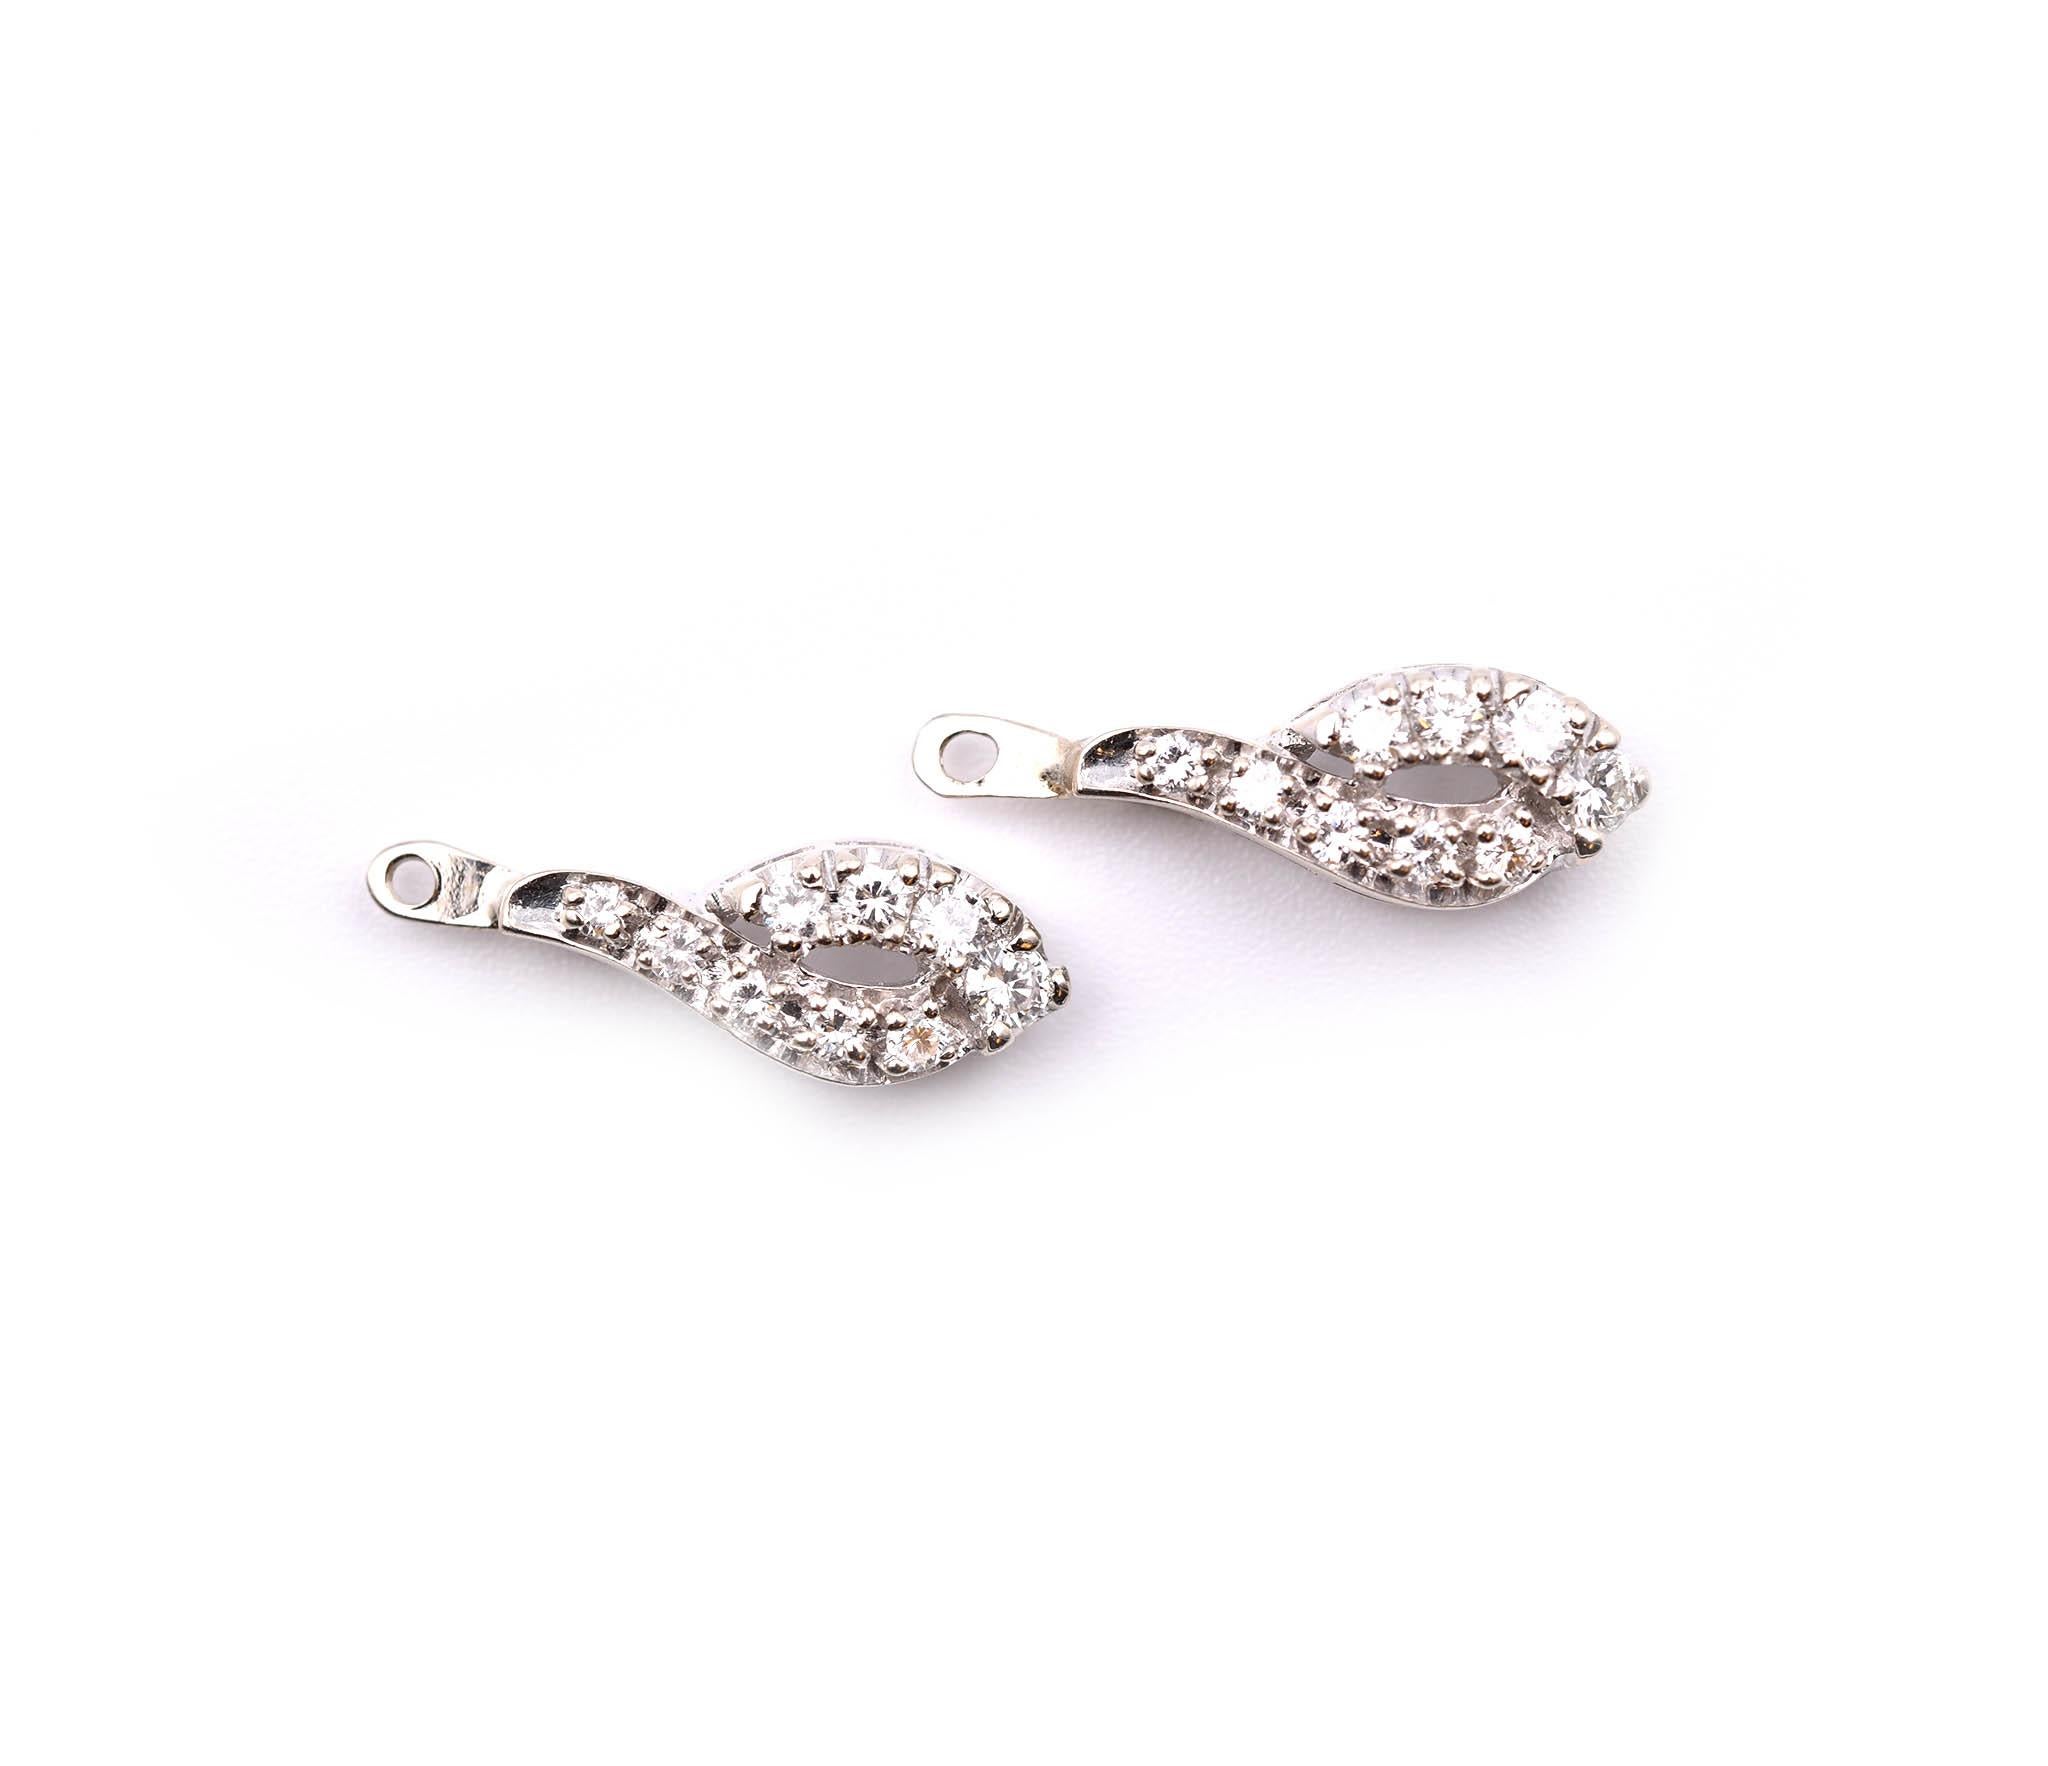 Designer: custom design
Material: 14k white gold
Diamonds: 12 rount cut = .55cttw
Color: G/H
Clarity: SI1-SI2
Dimensions: each earring enhancer is 19.72mm long and 6.50mm wide
Weight: 2.19 grams